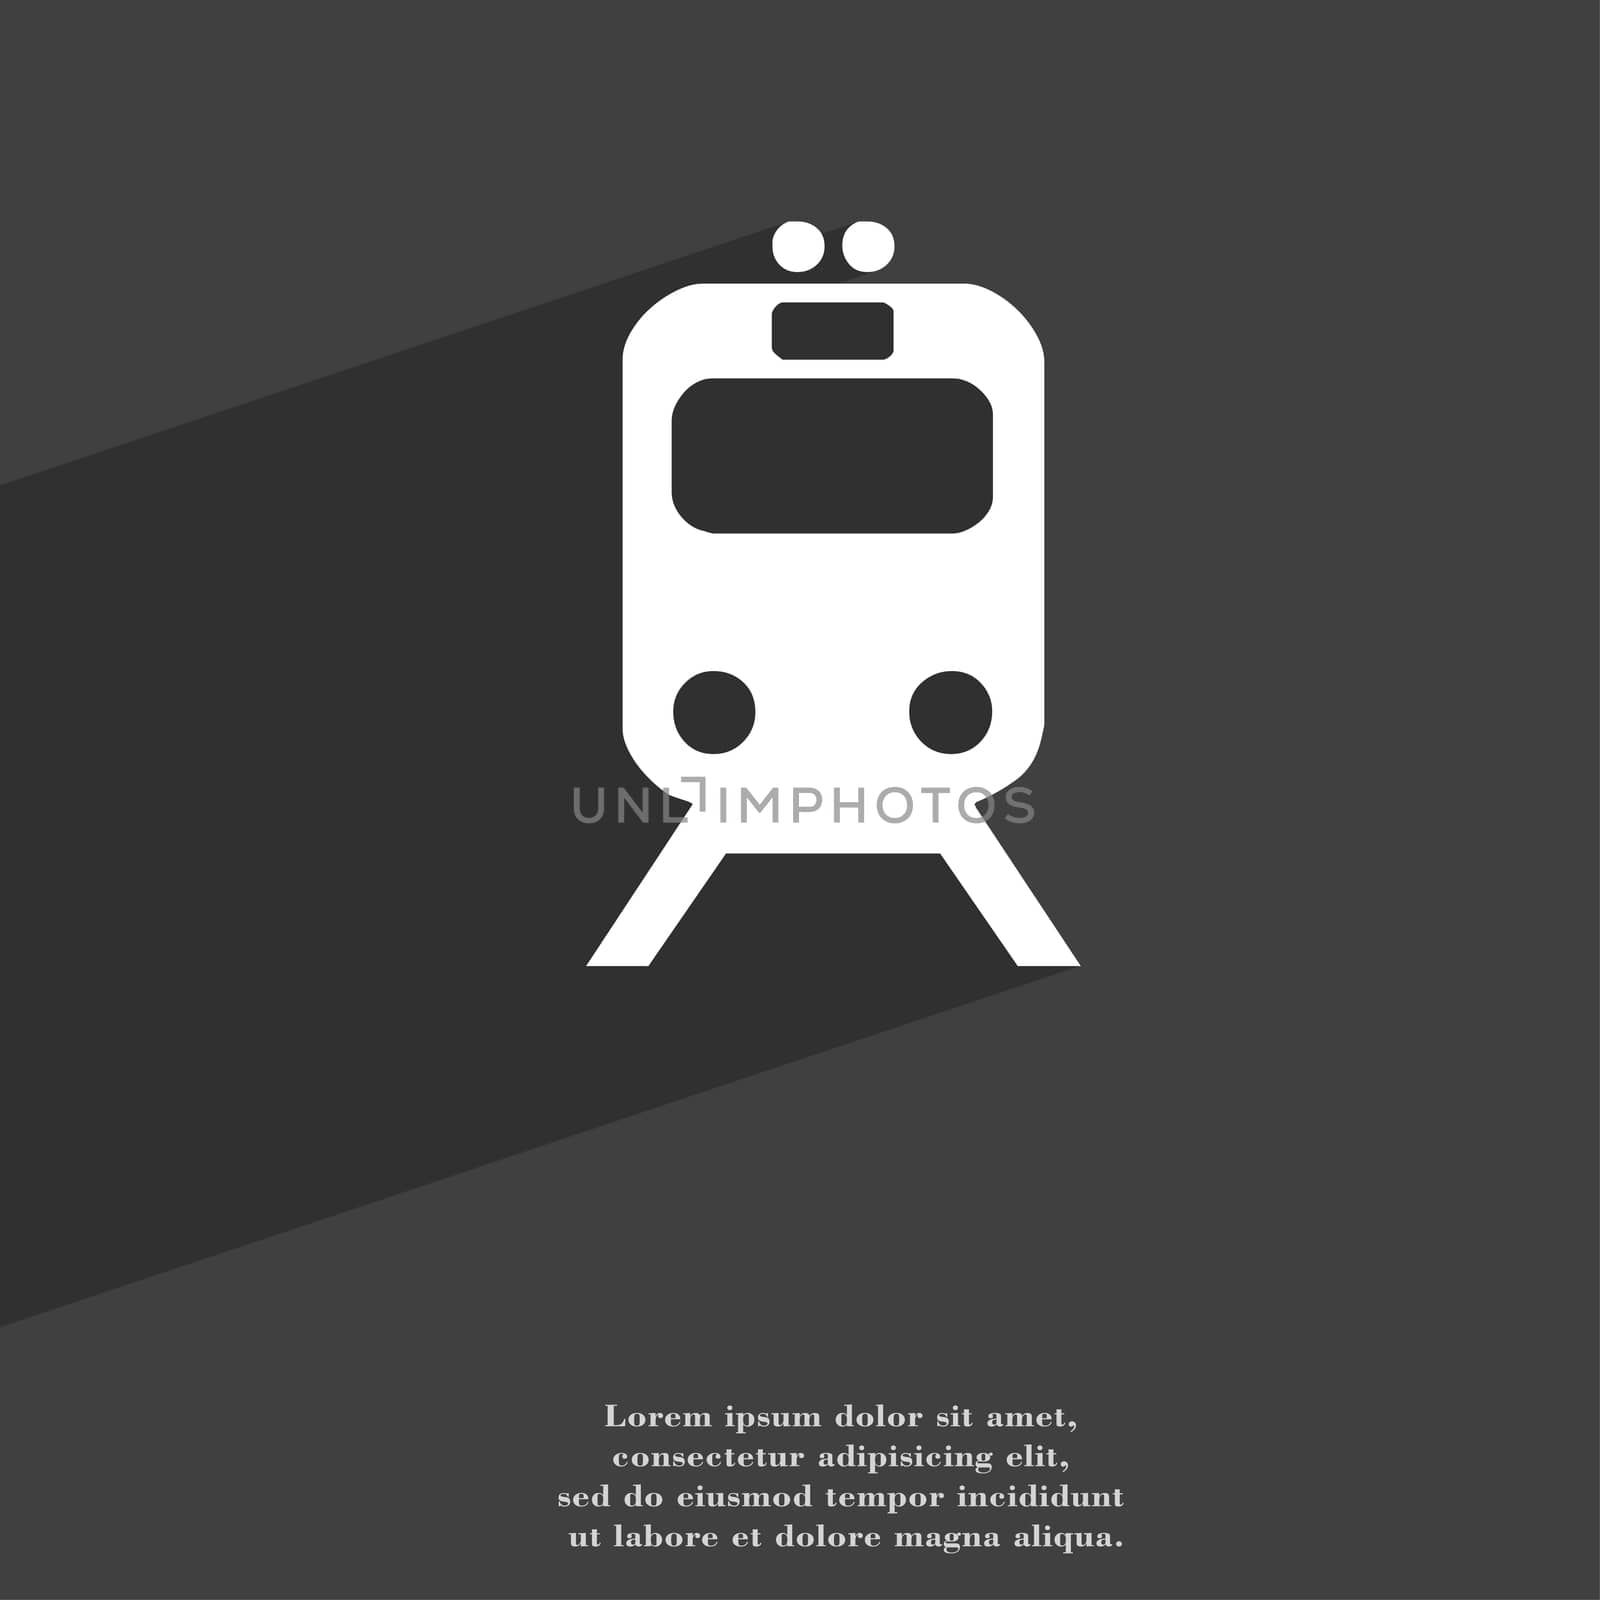 train icon symbol Flat modern web design with long shadow and space for your text. illustration